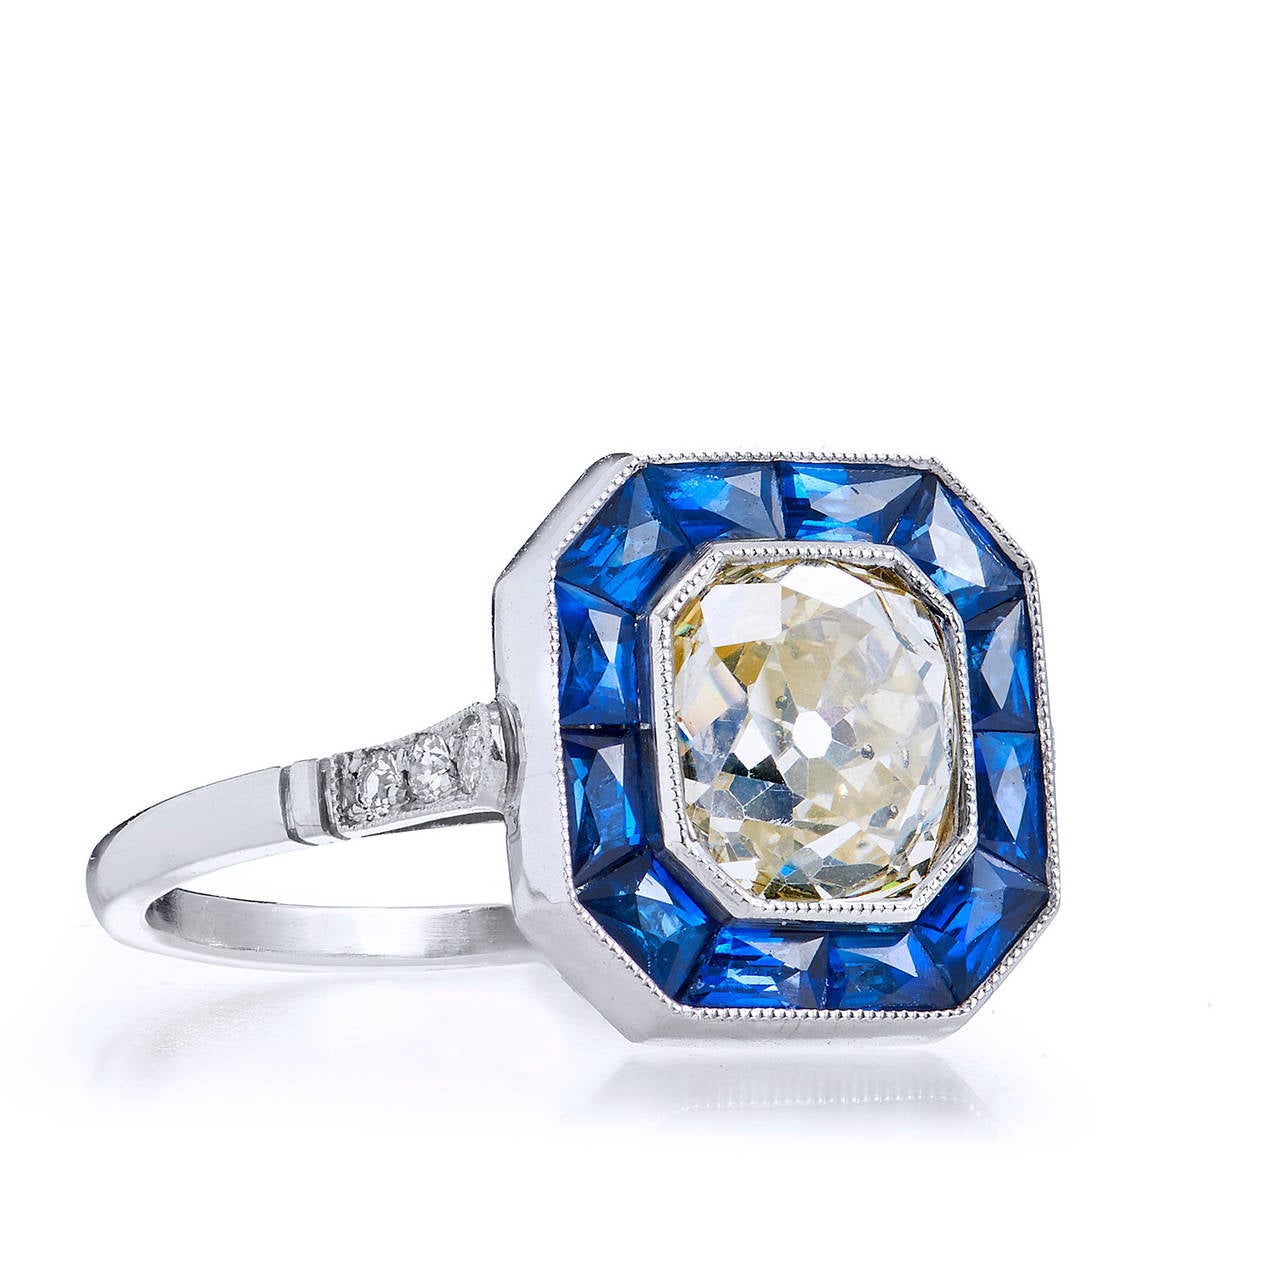 This picturesque ring captures the target design flawlessly with channel set French cut sapphires framing the 1.63 carat old mine very light brownish yellow diamond as the focal point  of the jeweled canvas. The ring is complete with diamonds set